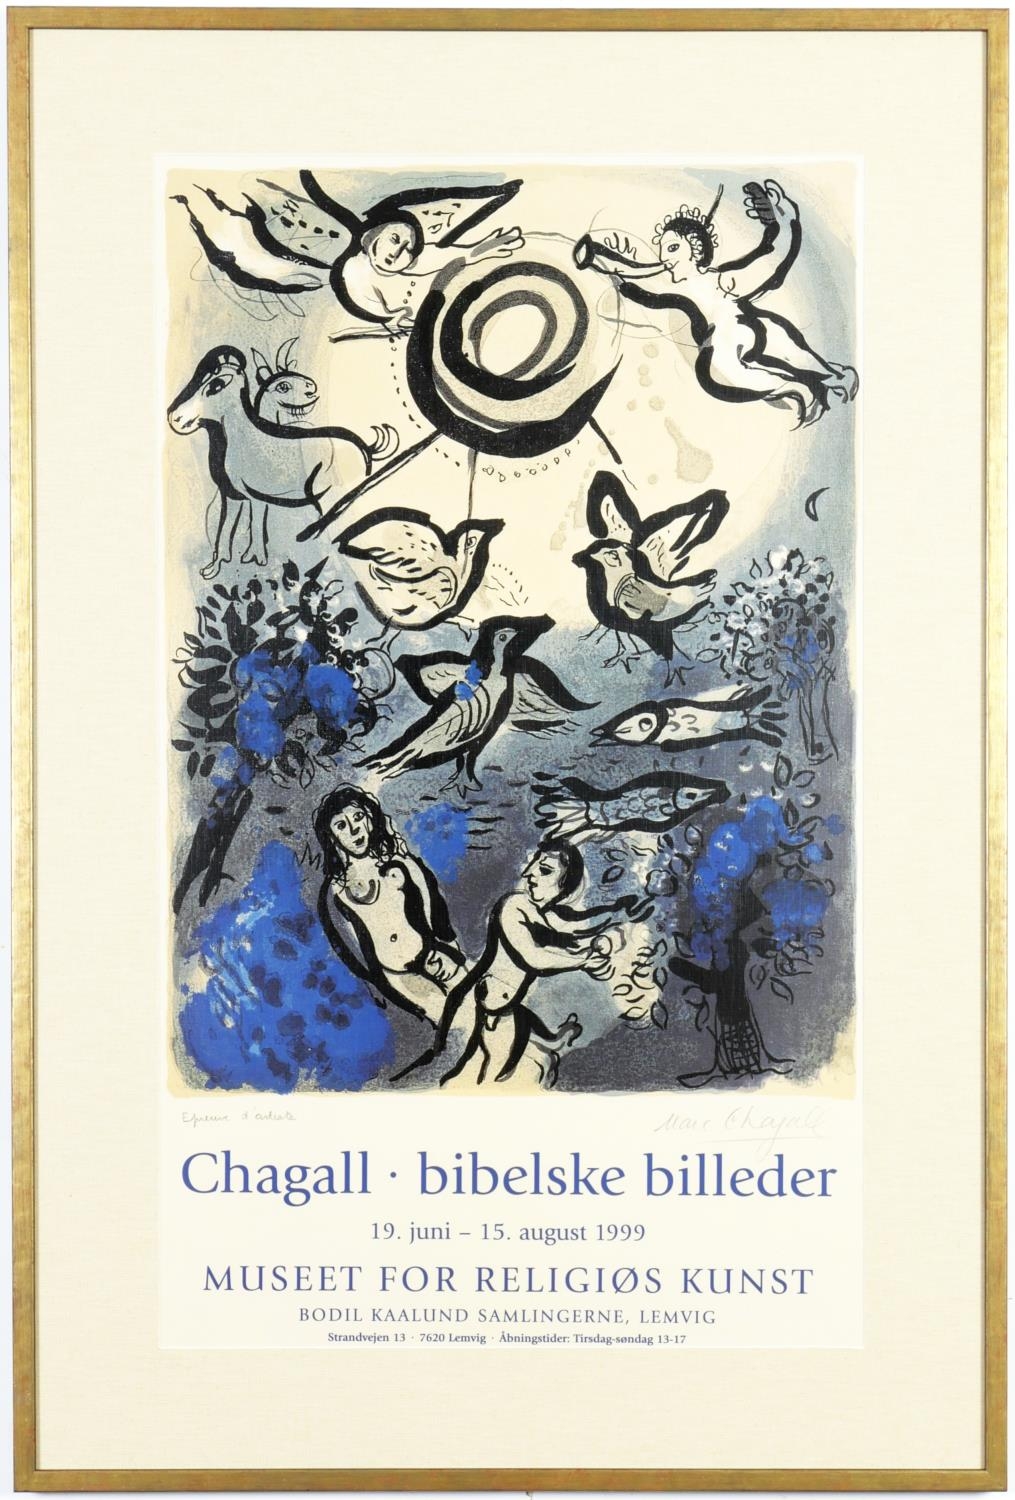 MARC CHAGALL, Creation, the poster, signed in the plate, 88 x 58cm. (Subject to ARR - see Buyers